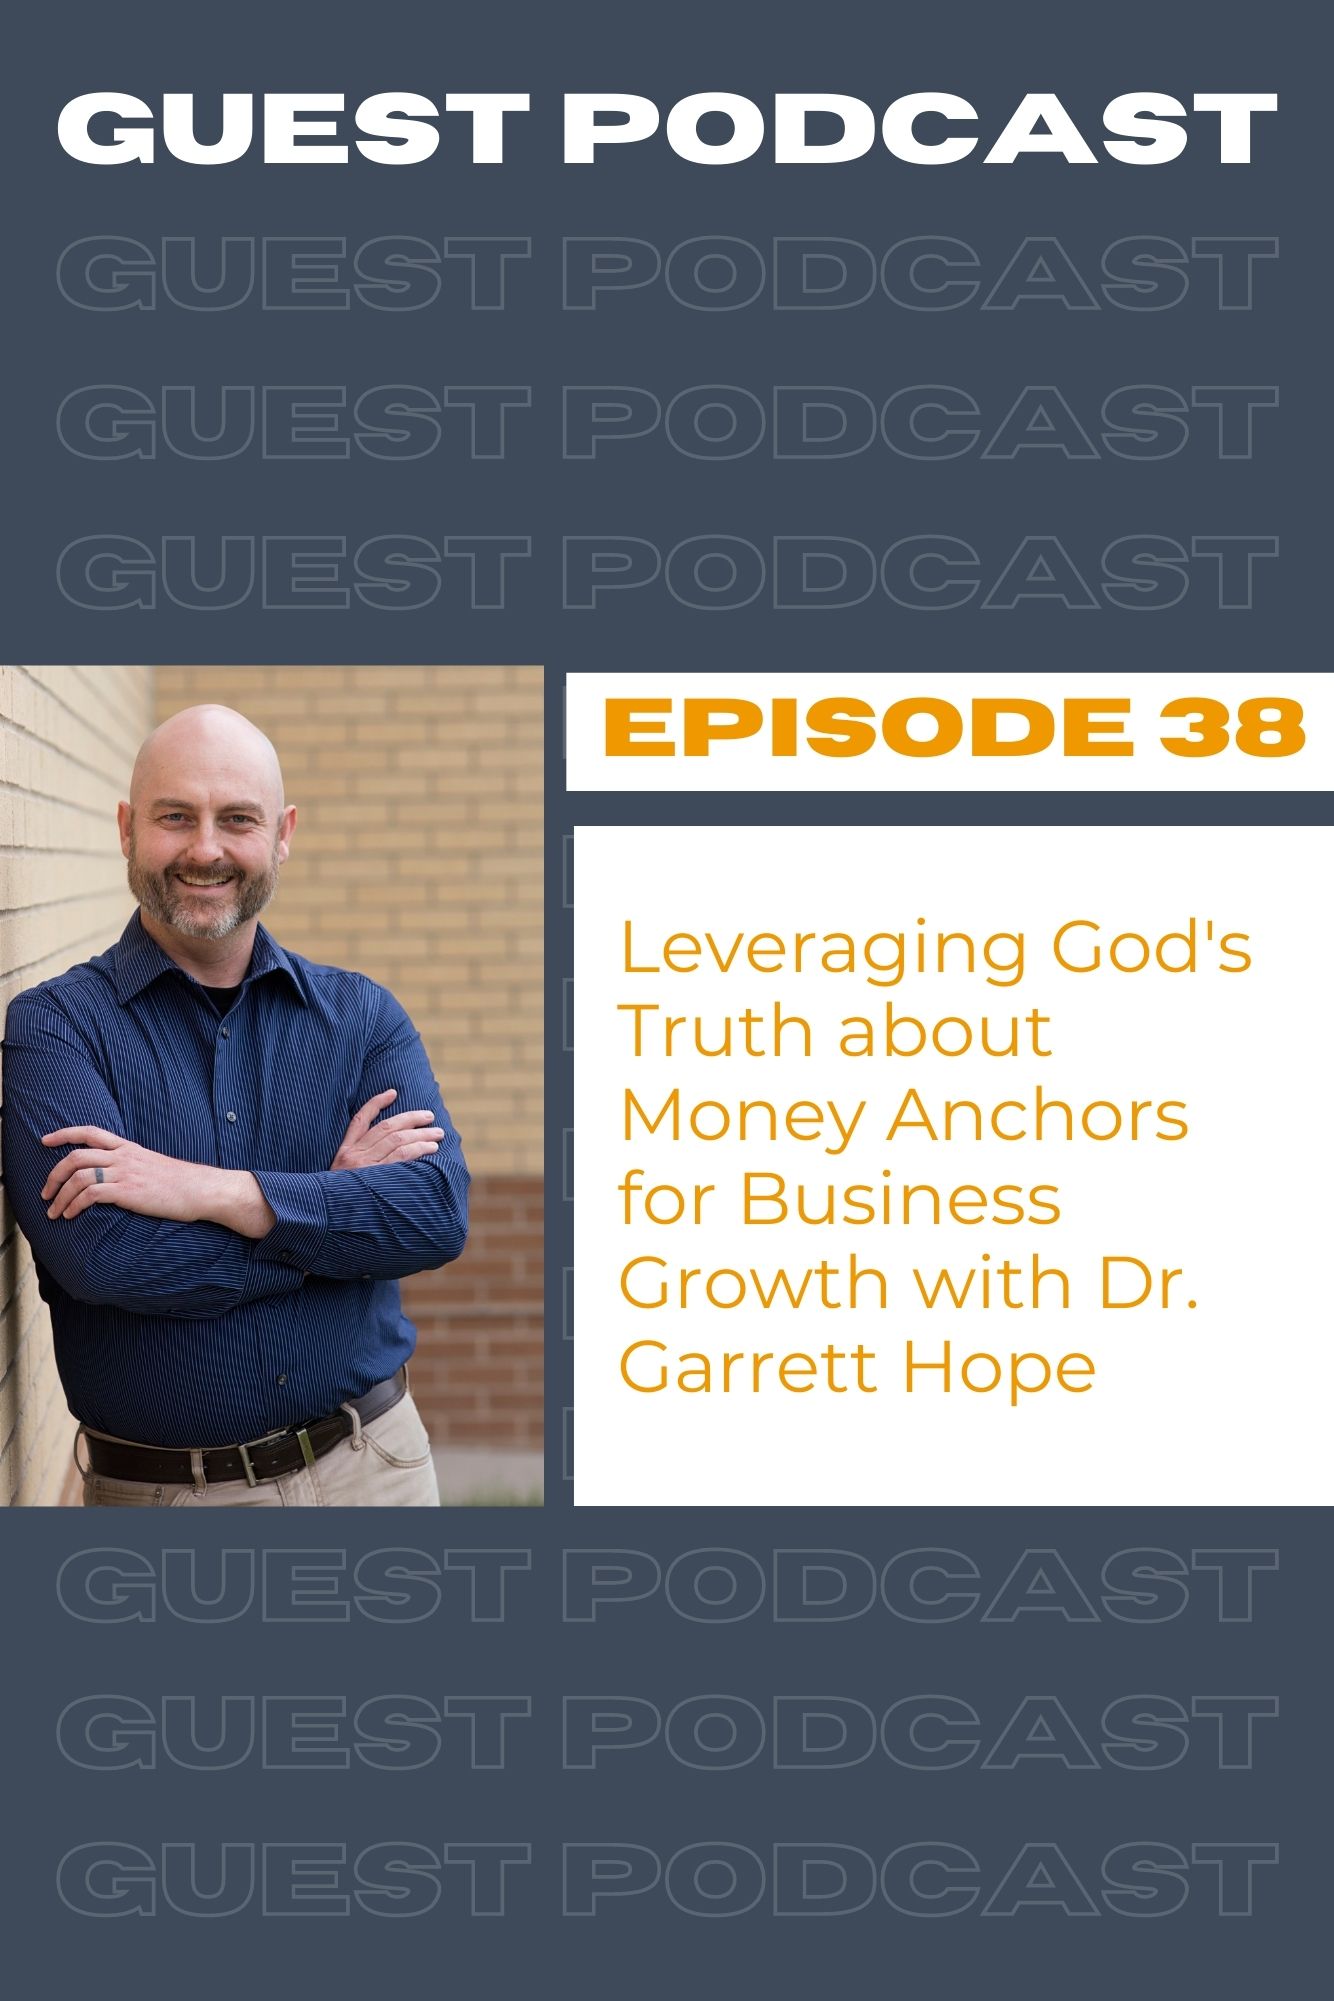 Dr. Garrett Hope is a guest on the Christian Business Breakdown podcast to talk about money anchors and business growth for Christian business owners.